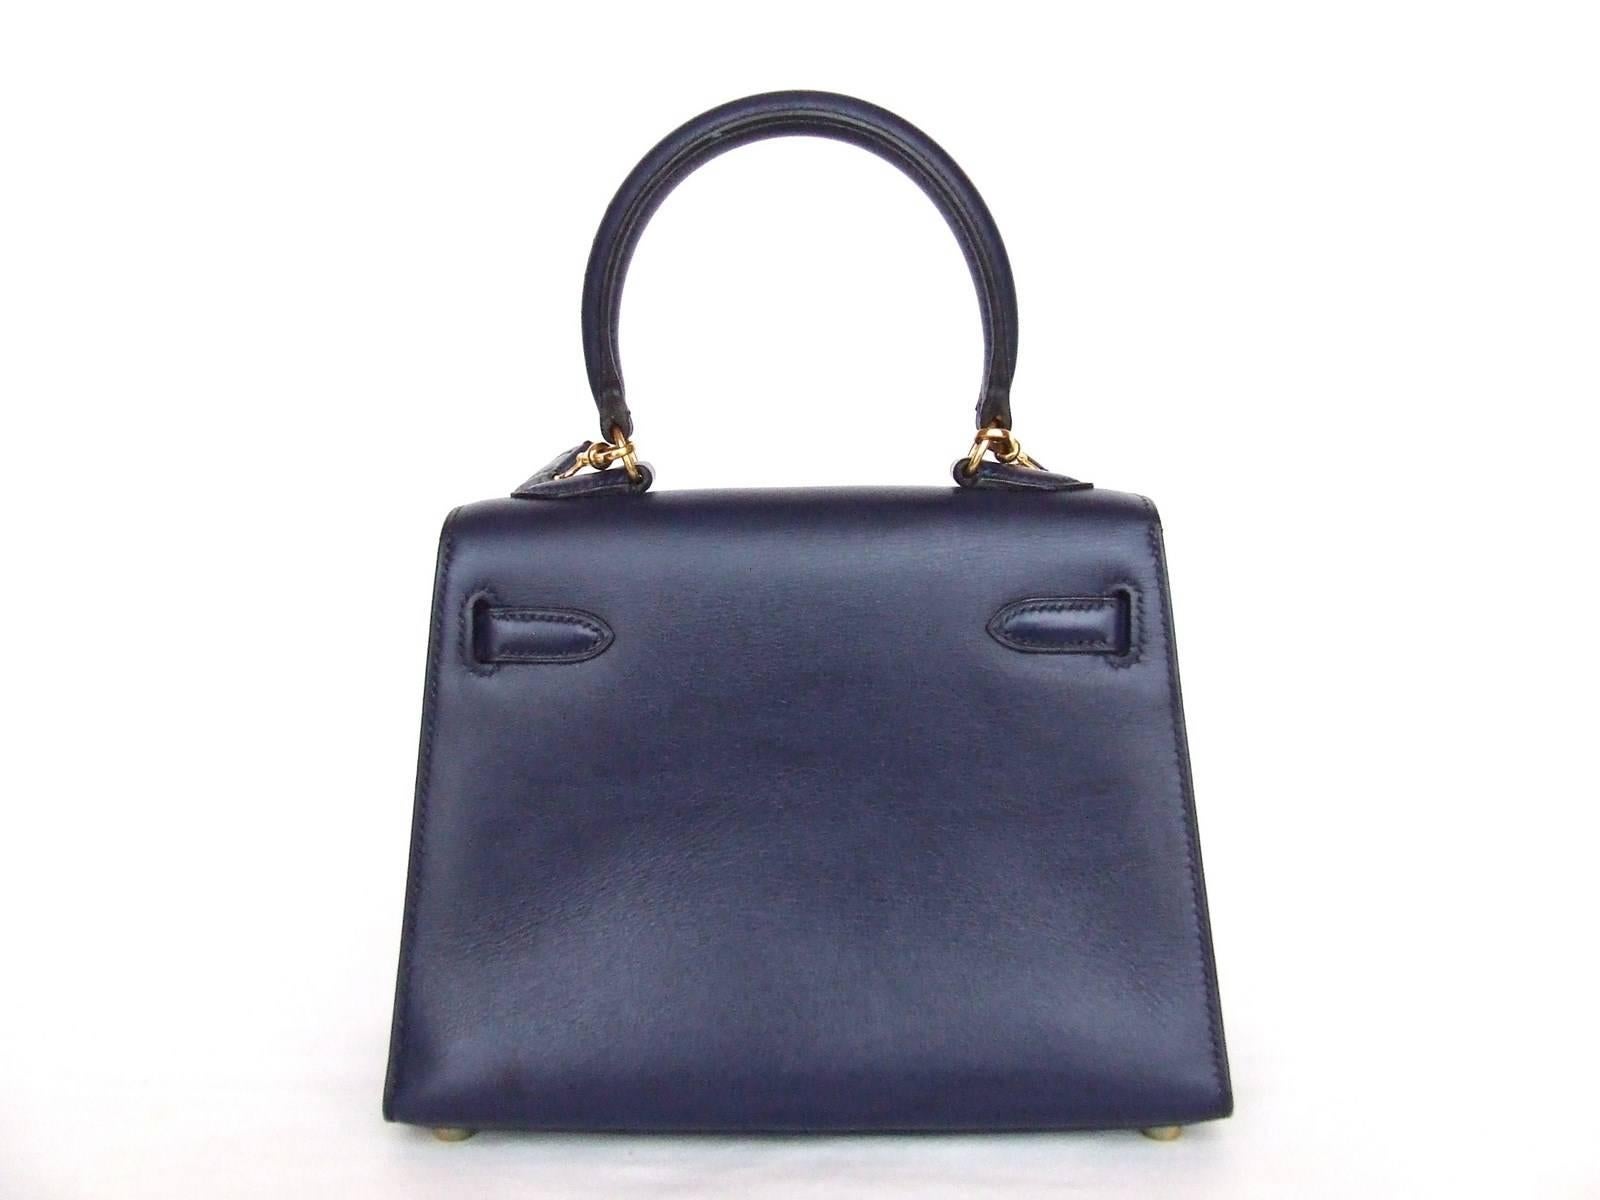 GORGEOUS AND RARE AUTHENTIC HERMES BAG

Mini Kelly

Sellier Version

Made in France

Stamp W

Made of Box Leather and Golden Hardware

Colorway: Blue, Lined with Blue leather

